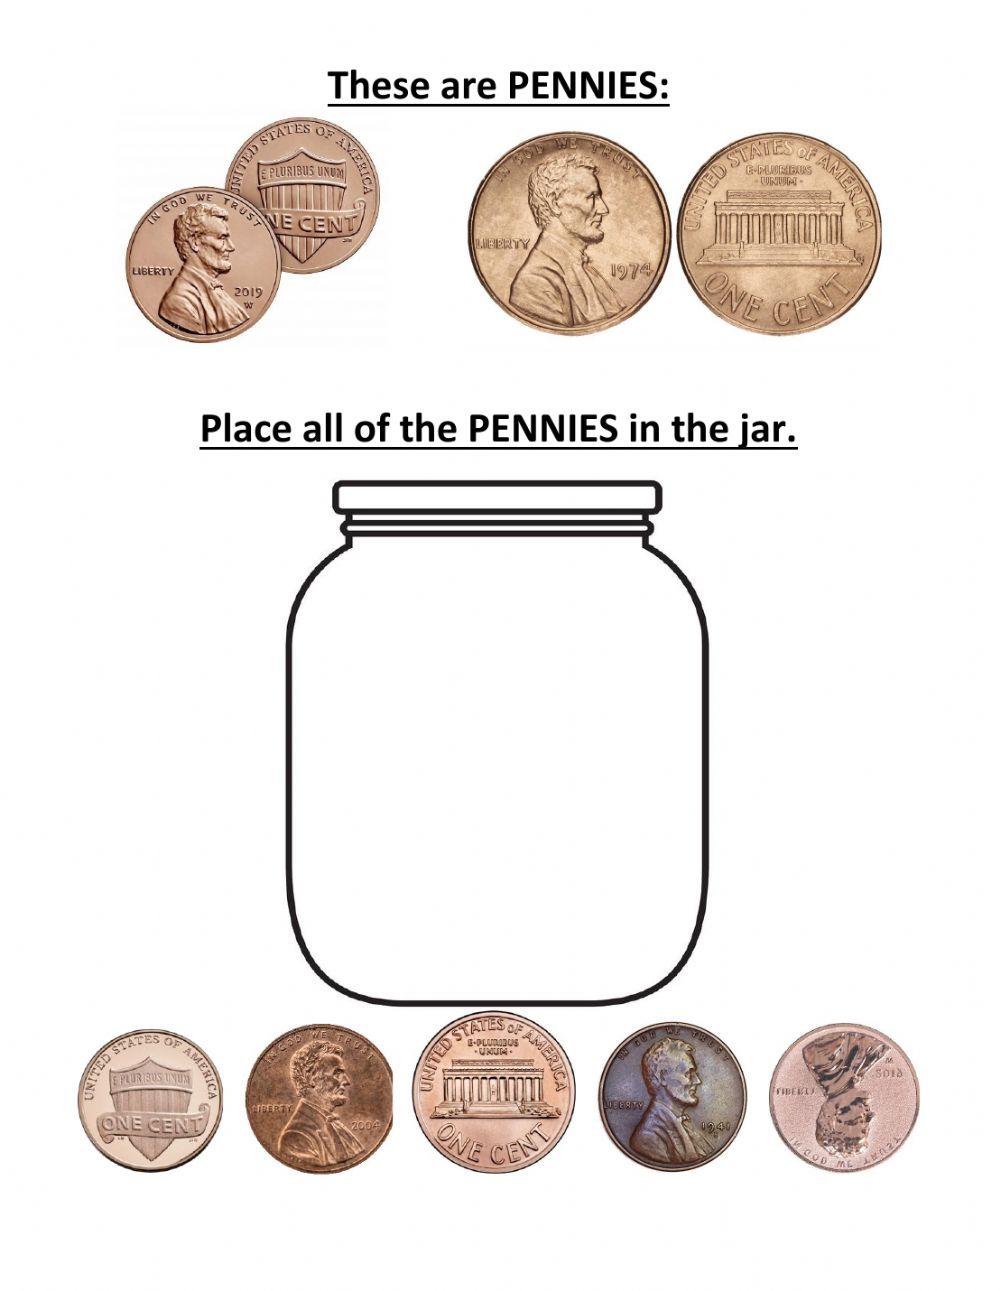 Put the pennies in the jar... all pennies